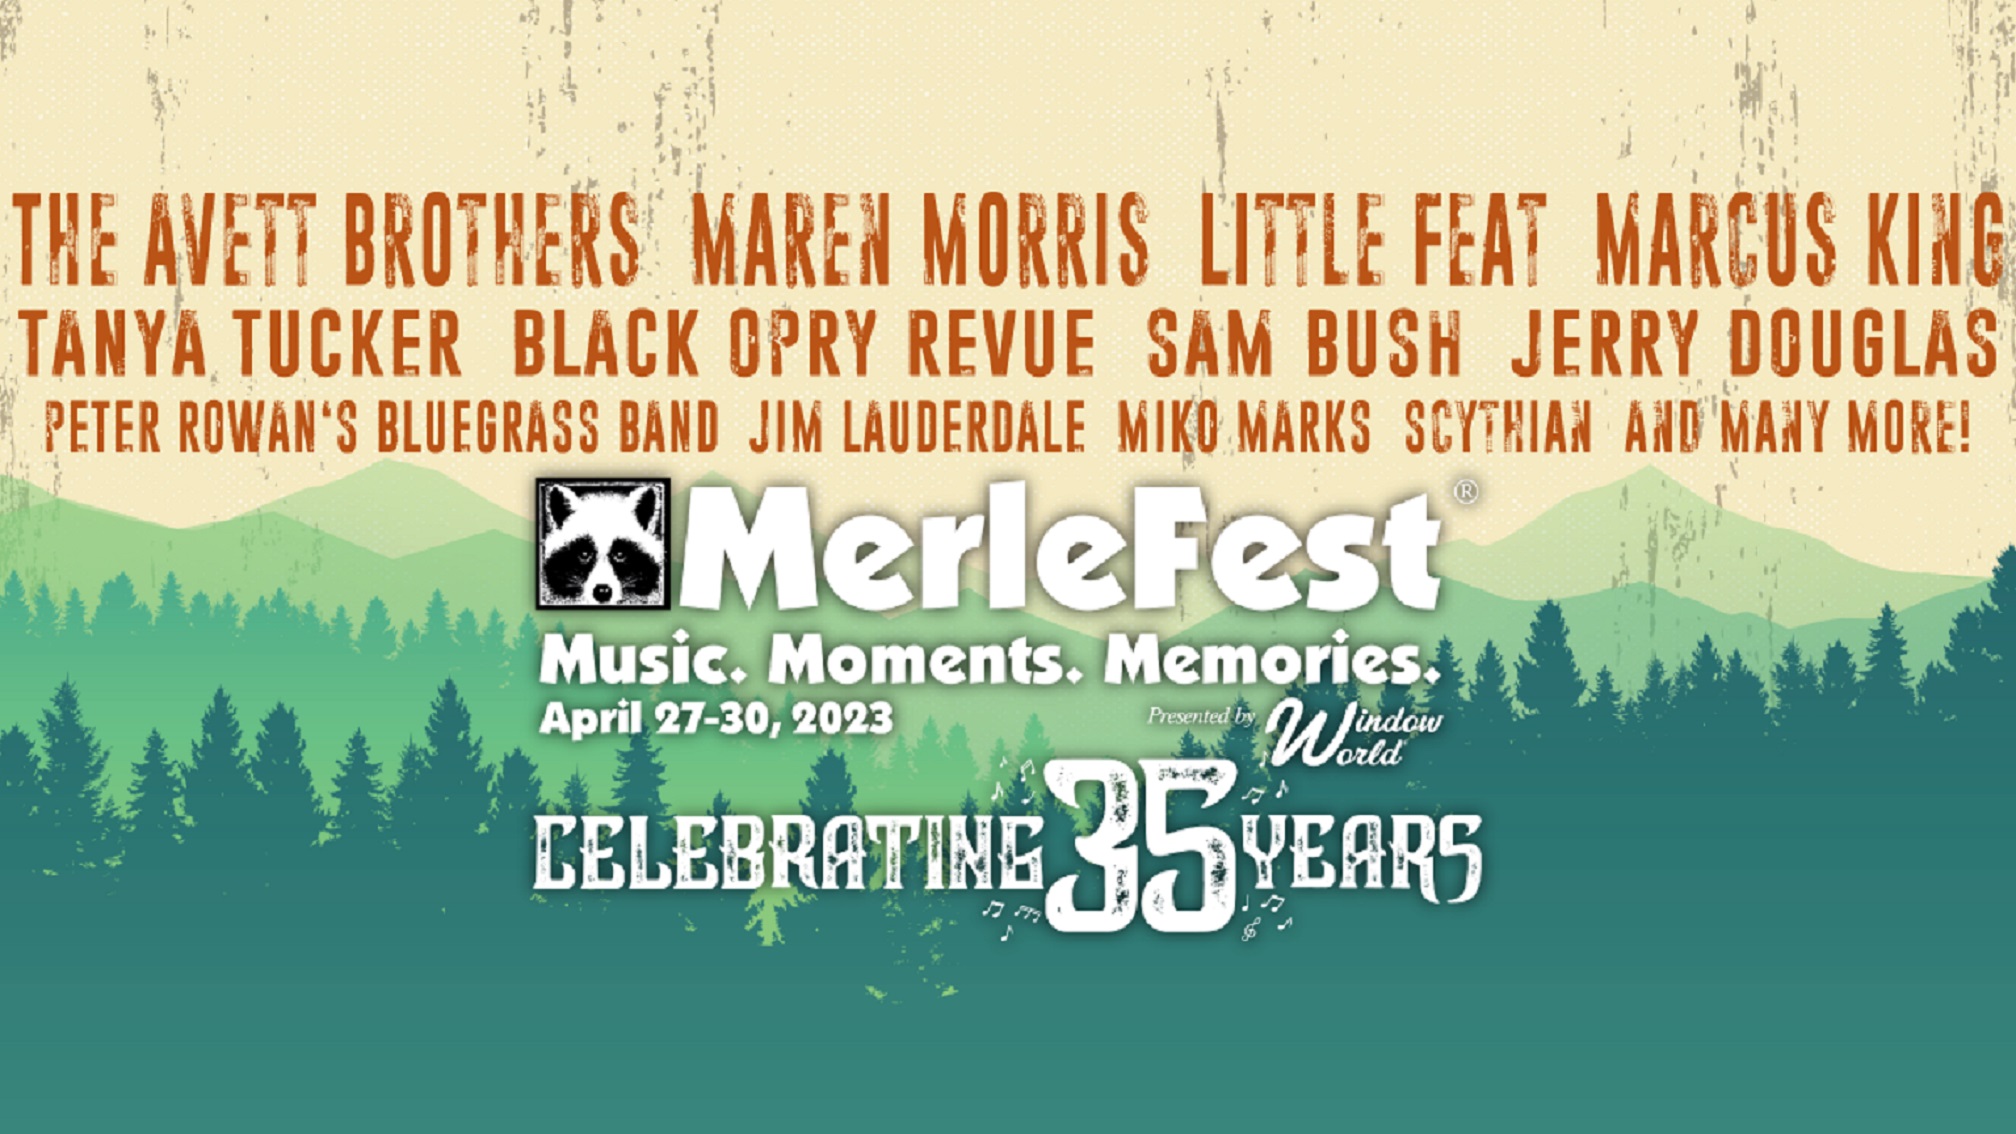 MerleFest Celebrates 35 Years of Music, Moments, and Memories